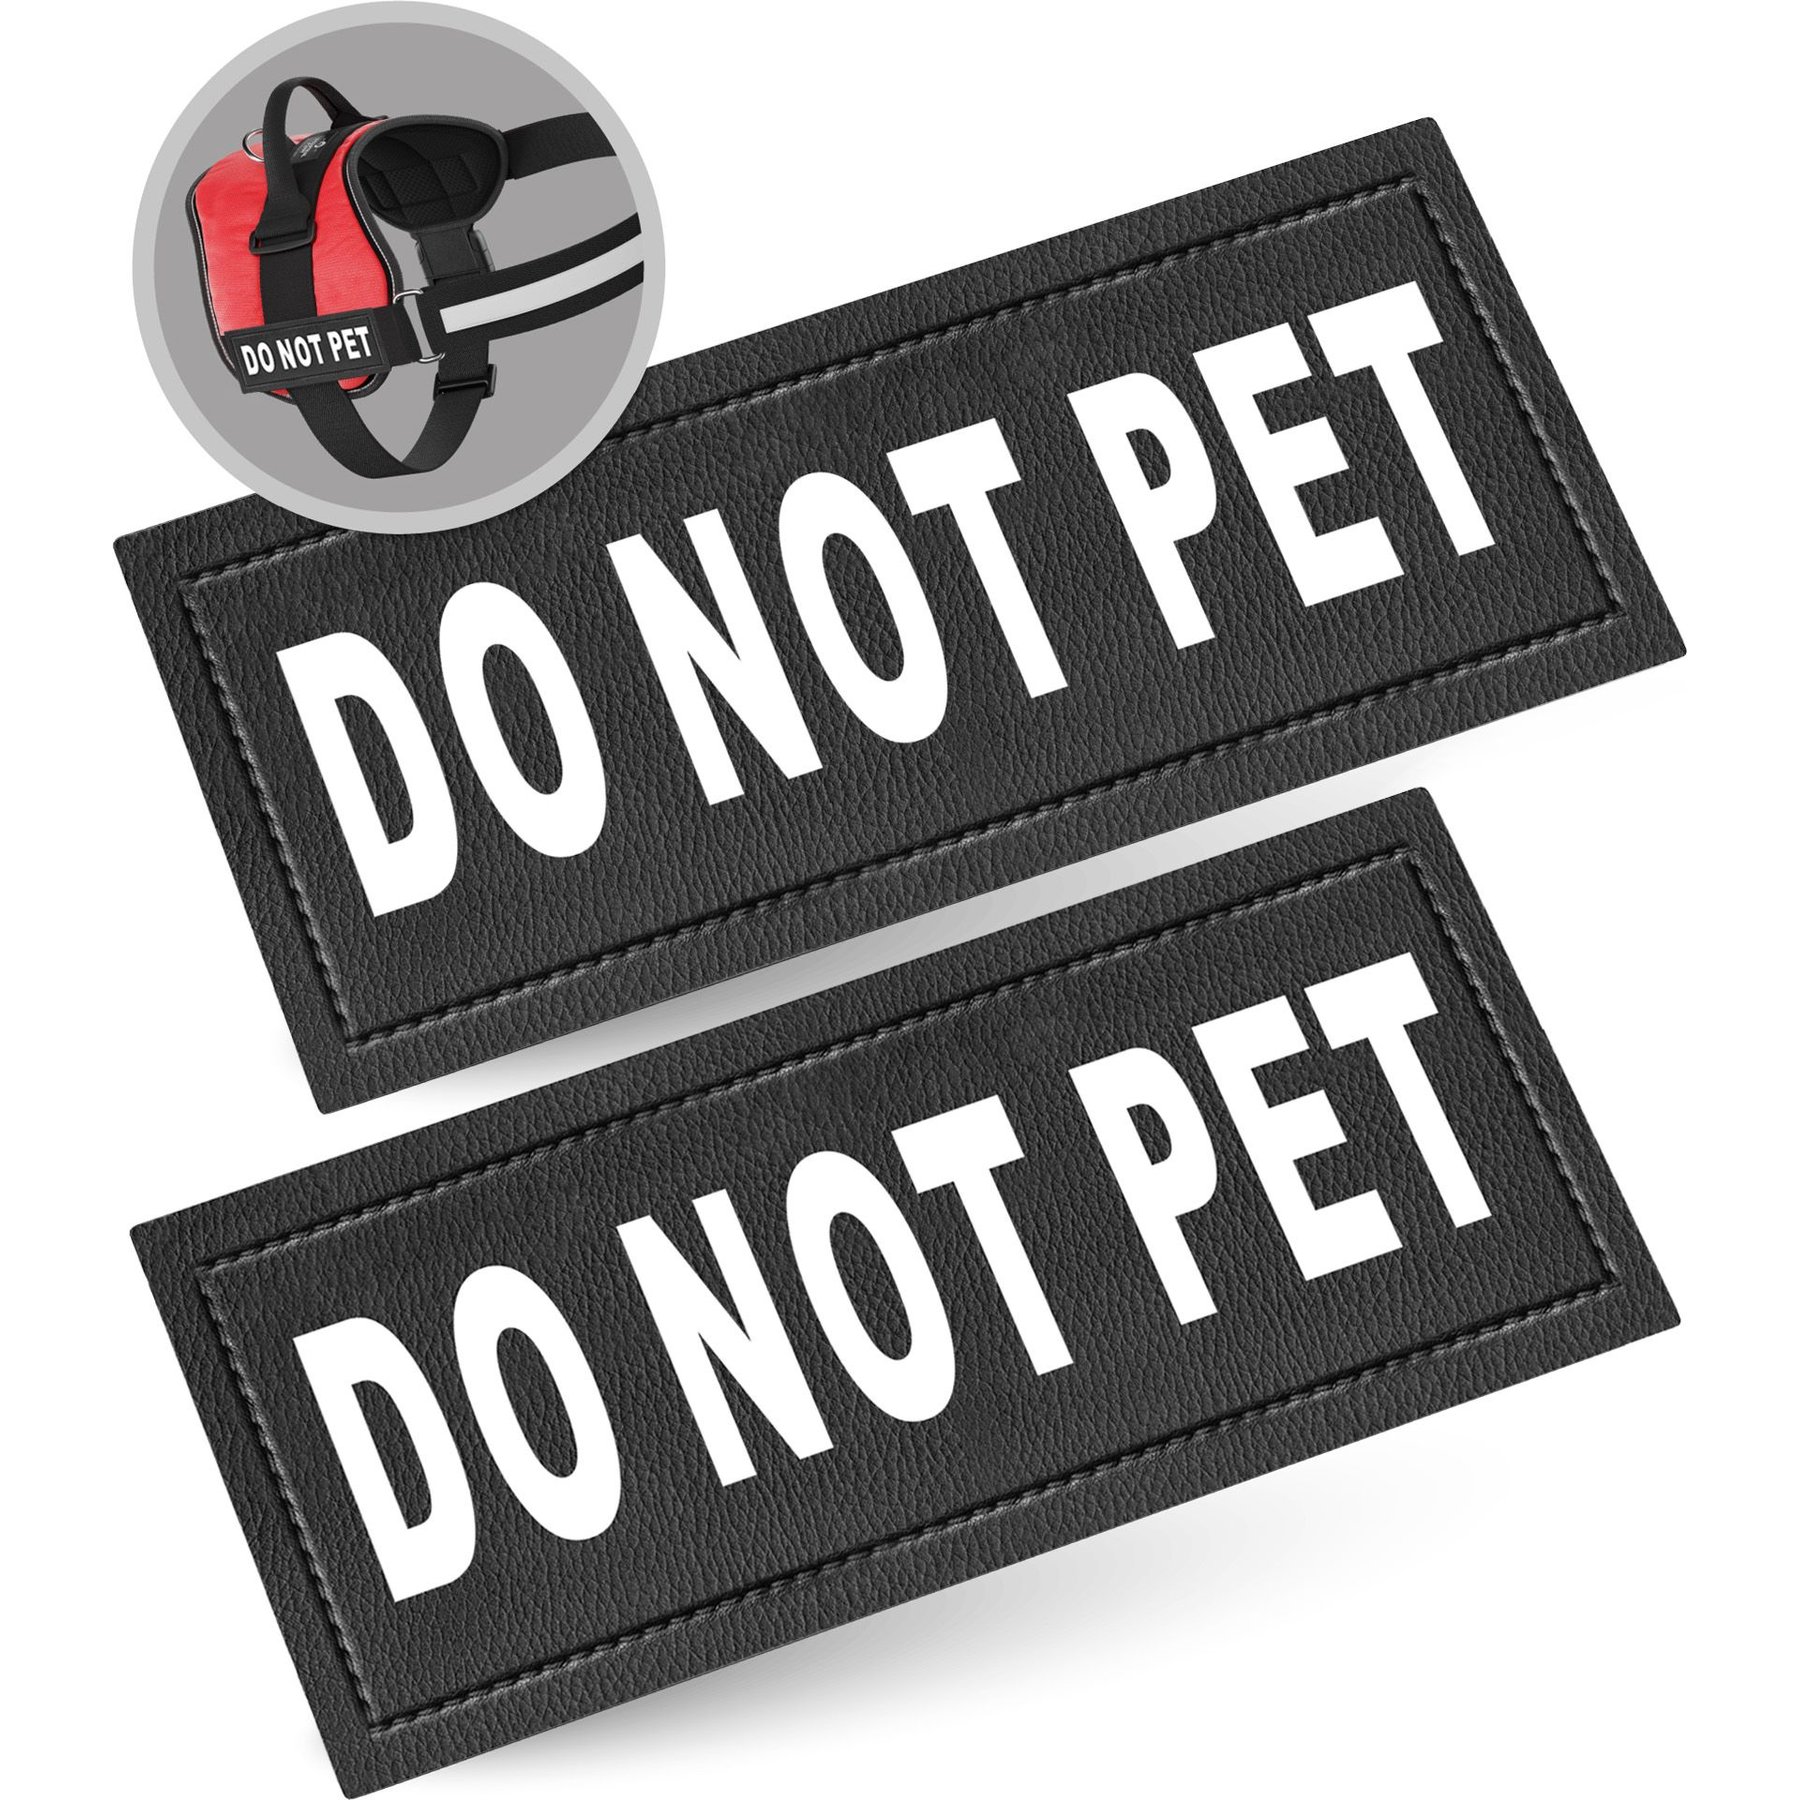 Do Not Pet - Im Working Service Dog Patch, Specialty Patches